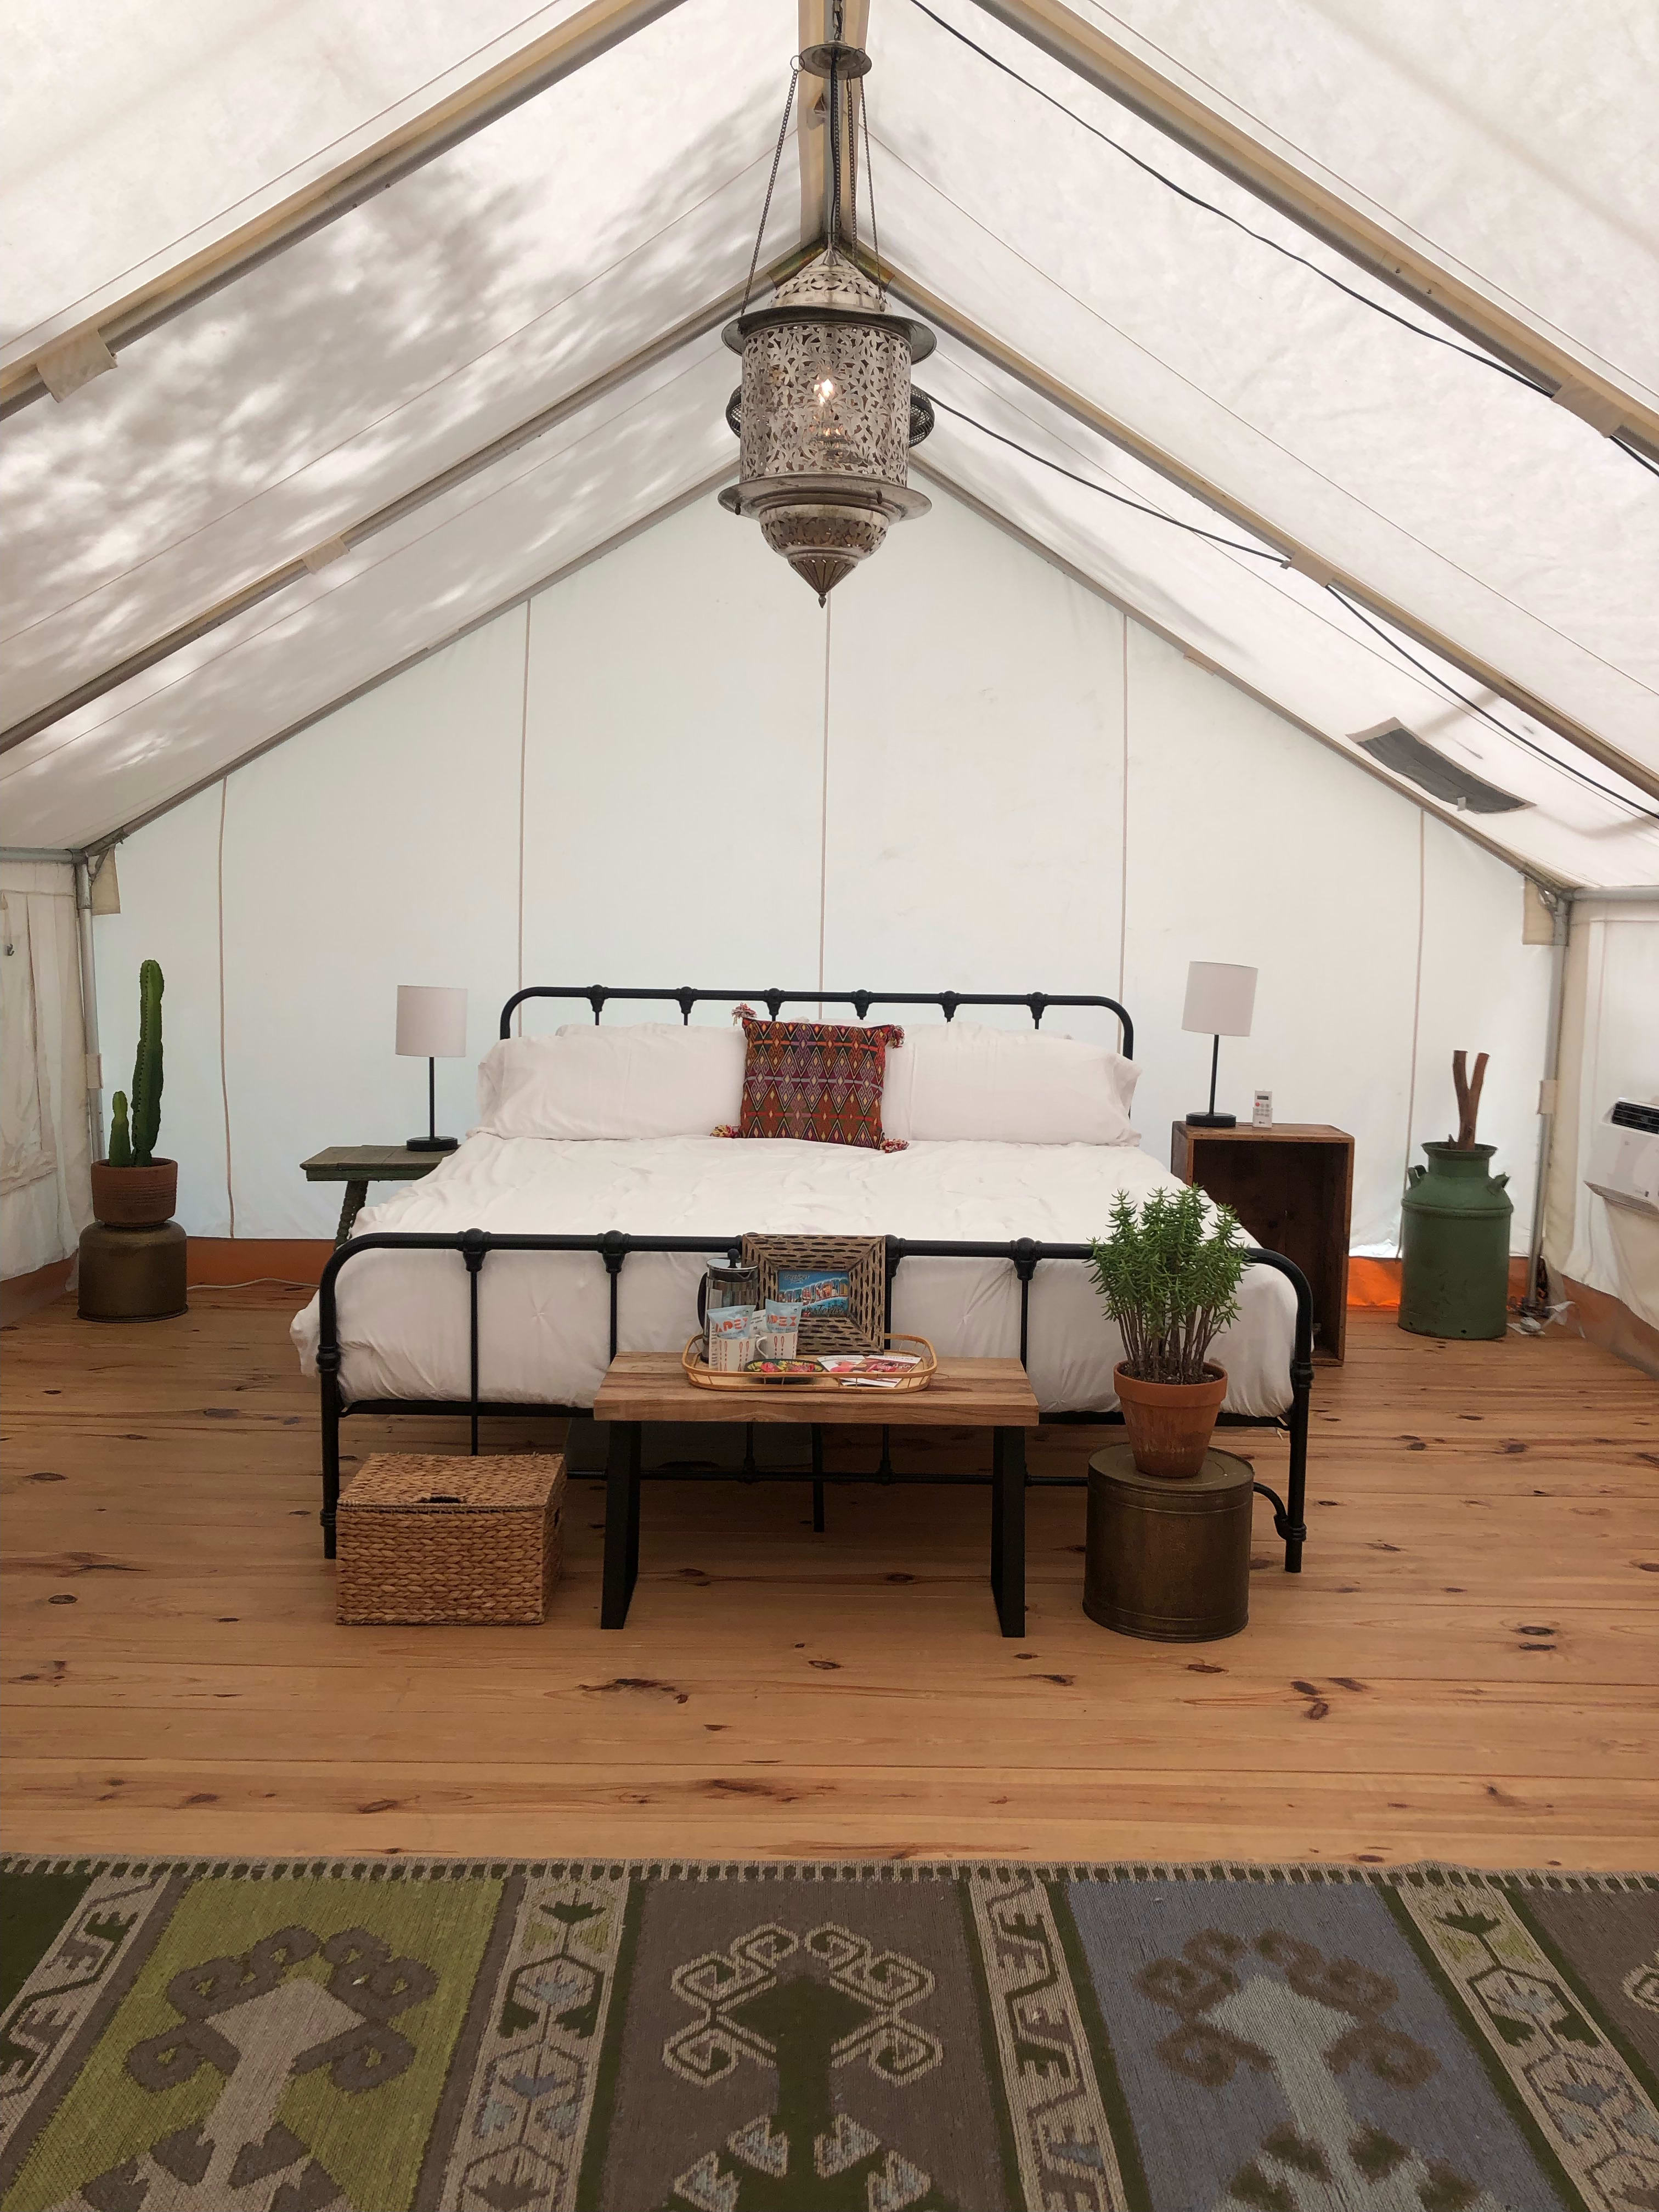 Our newly designed Moroccan inspired tent with a Texas Cowboy vibe